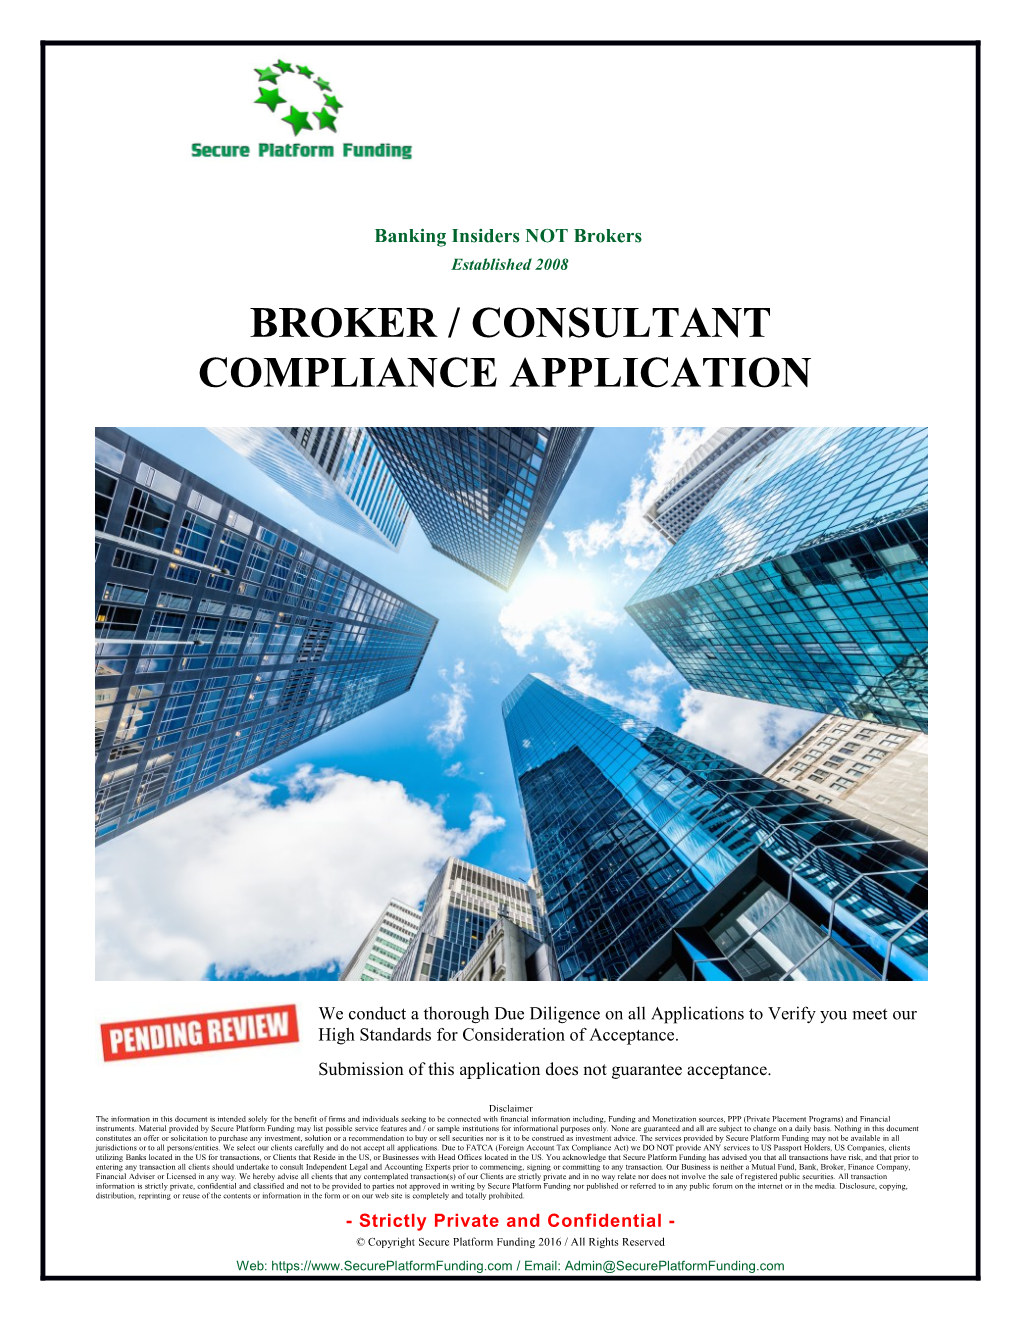 Broker / Consultant Compliance Application